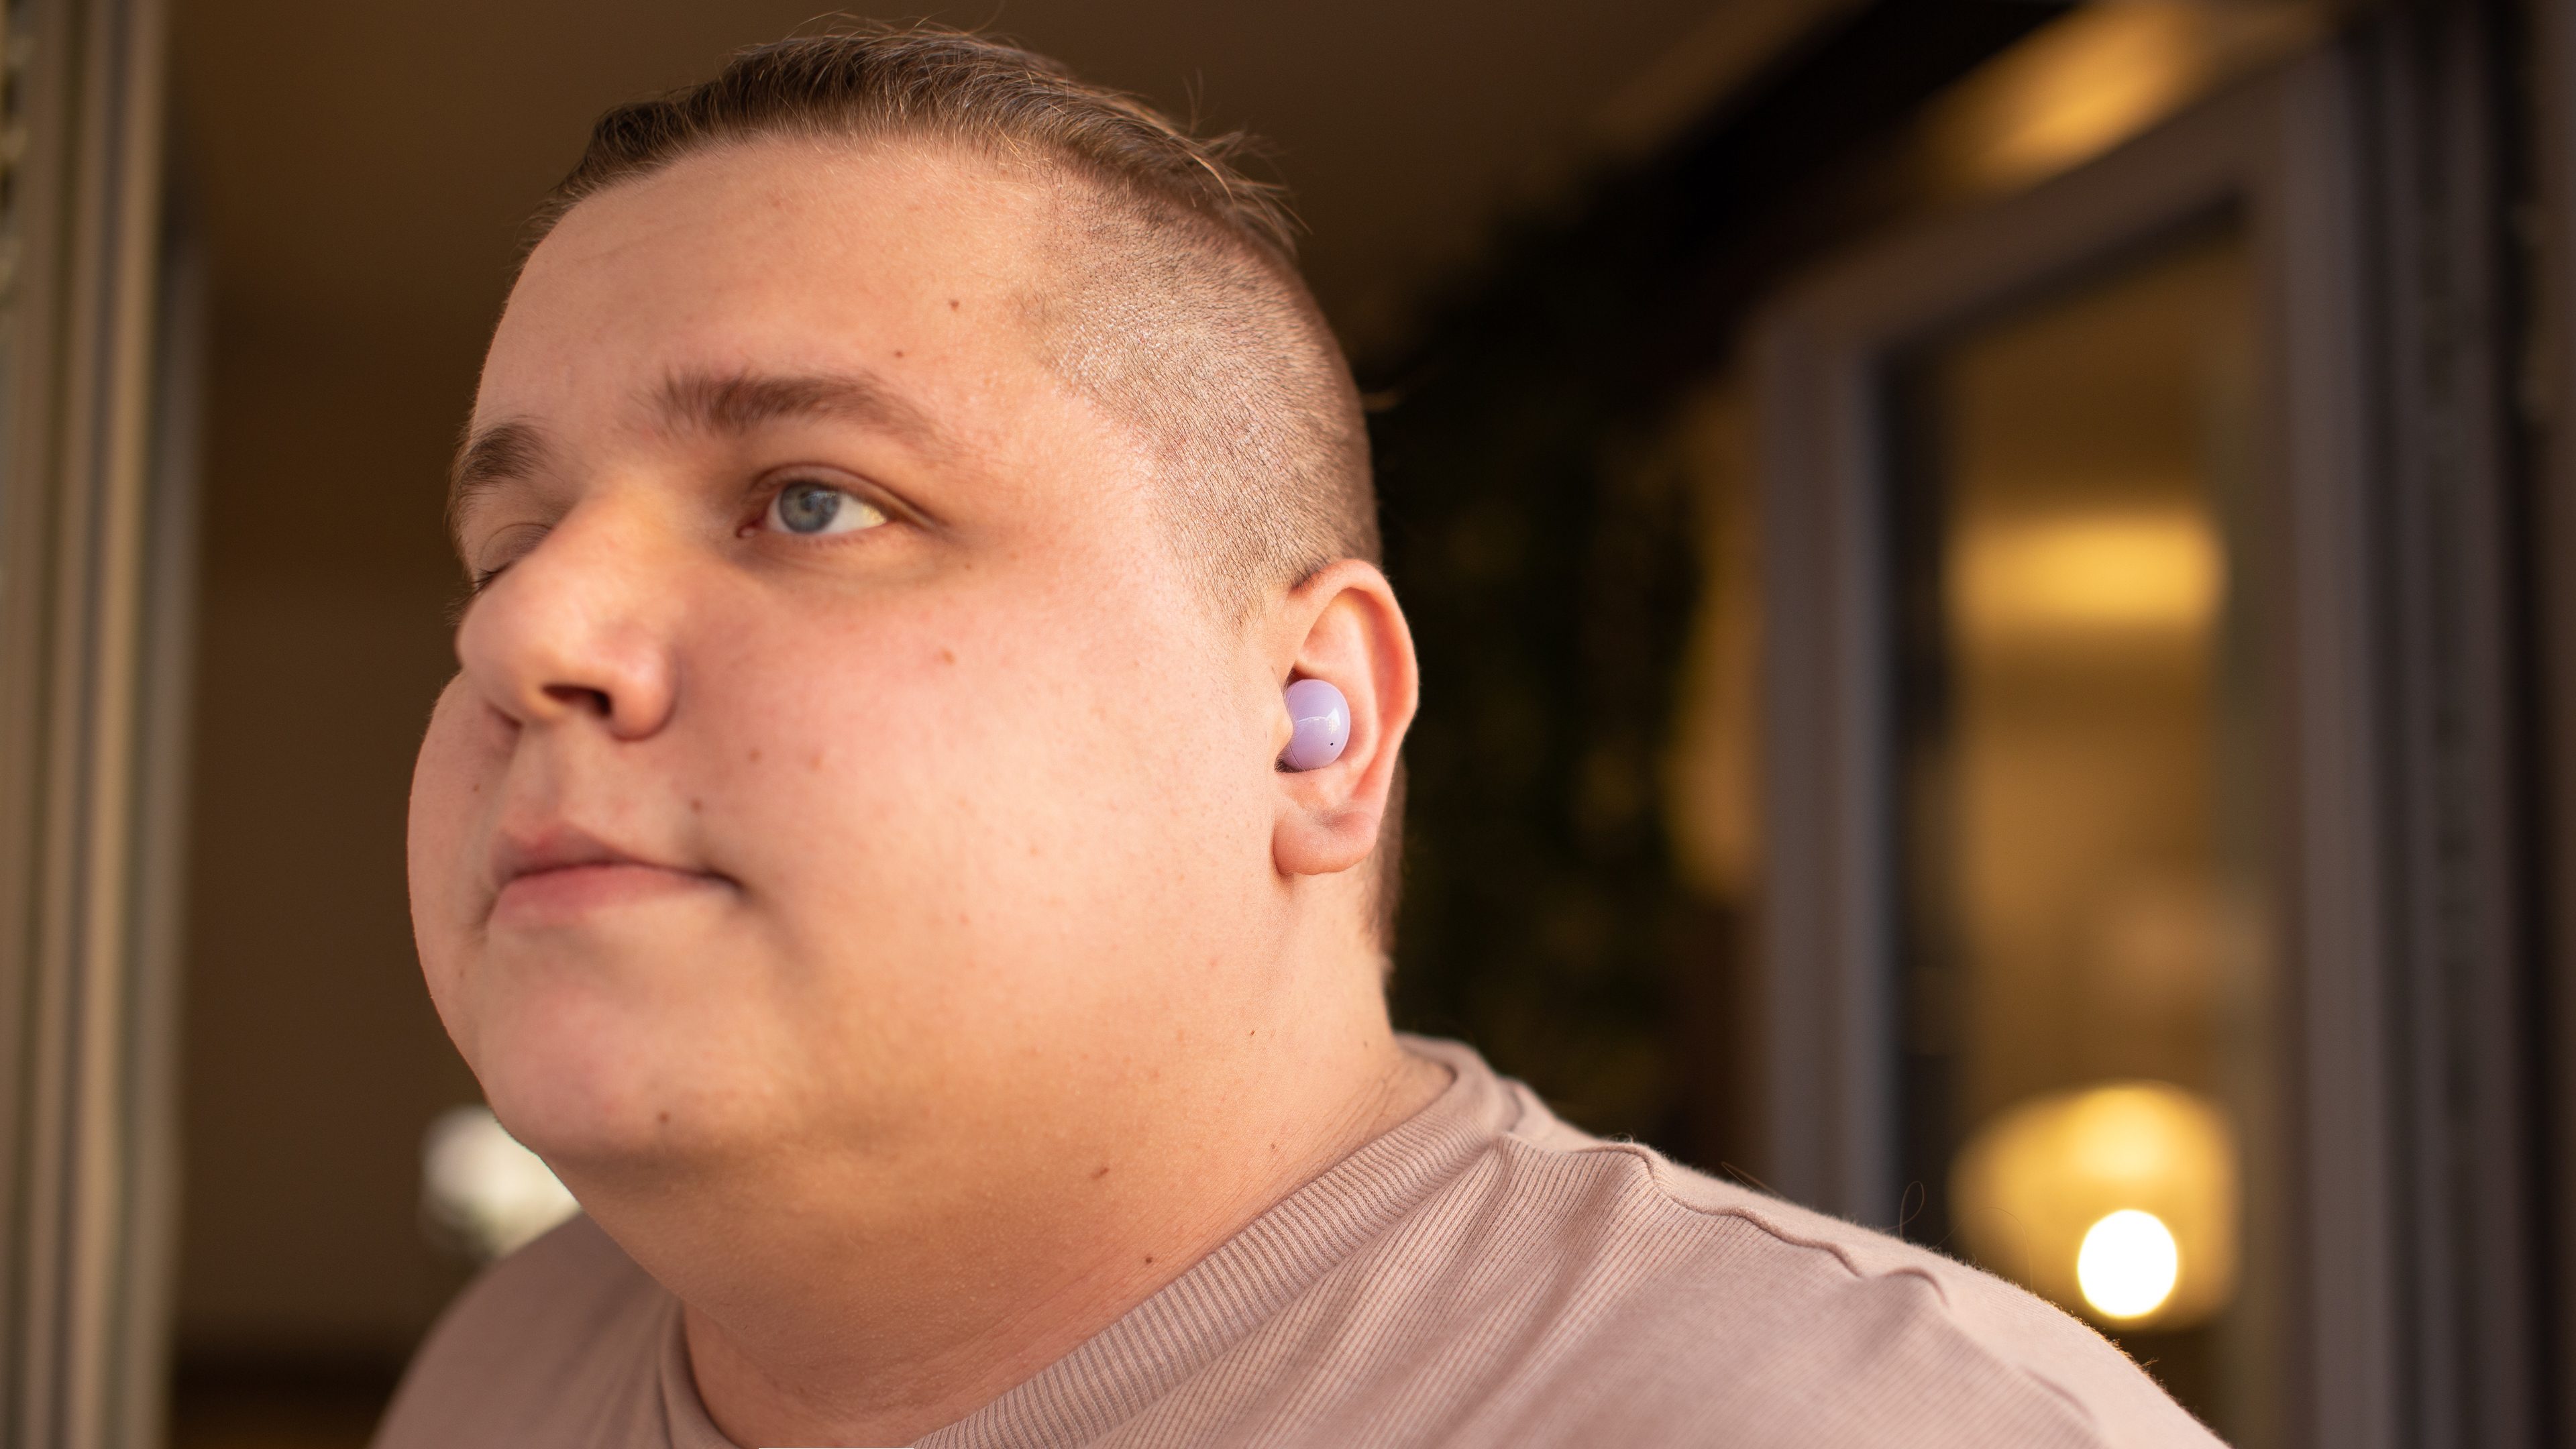 Galaxy Buds 2 review: It's all about being seen, not heard | NextPit